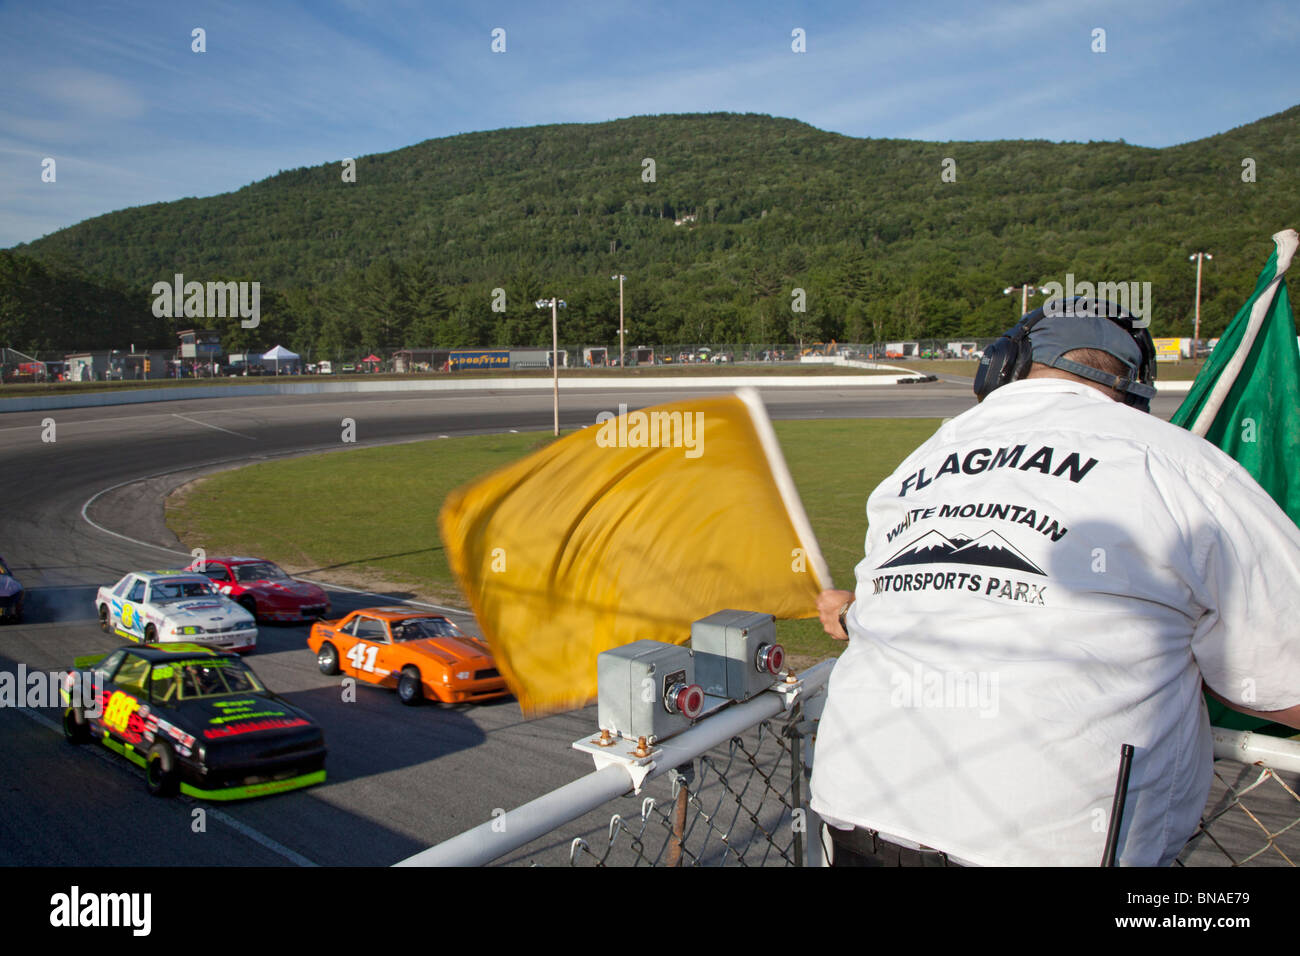 Woodstock, New Hampshire - The flagman waves signal flags during stock car racing at White Mountain Motorsports Park. Stock Photo